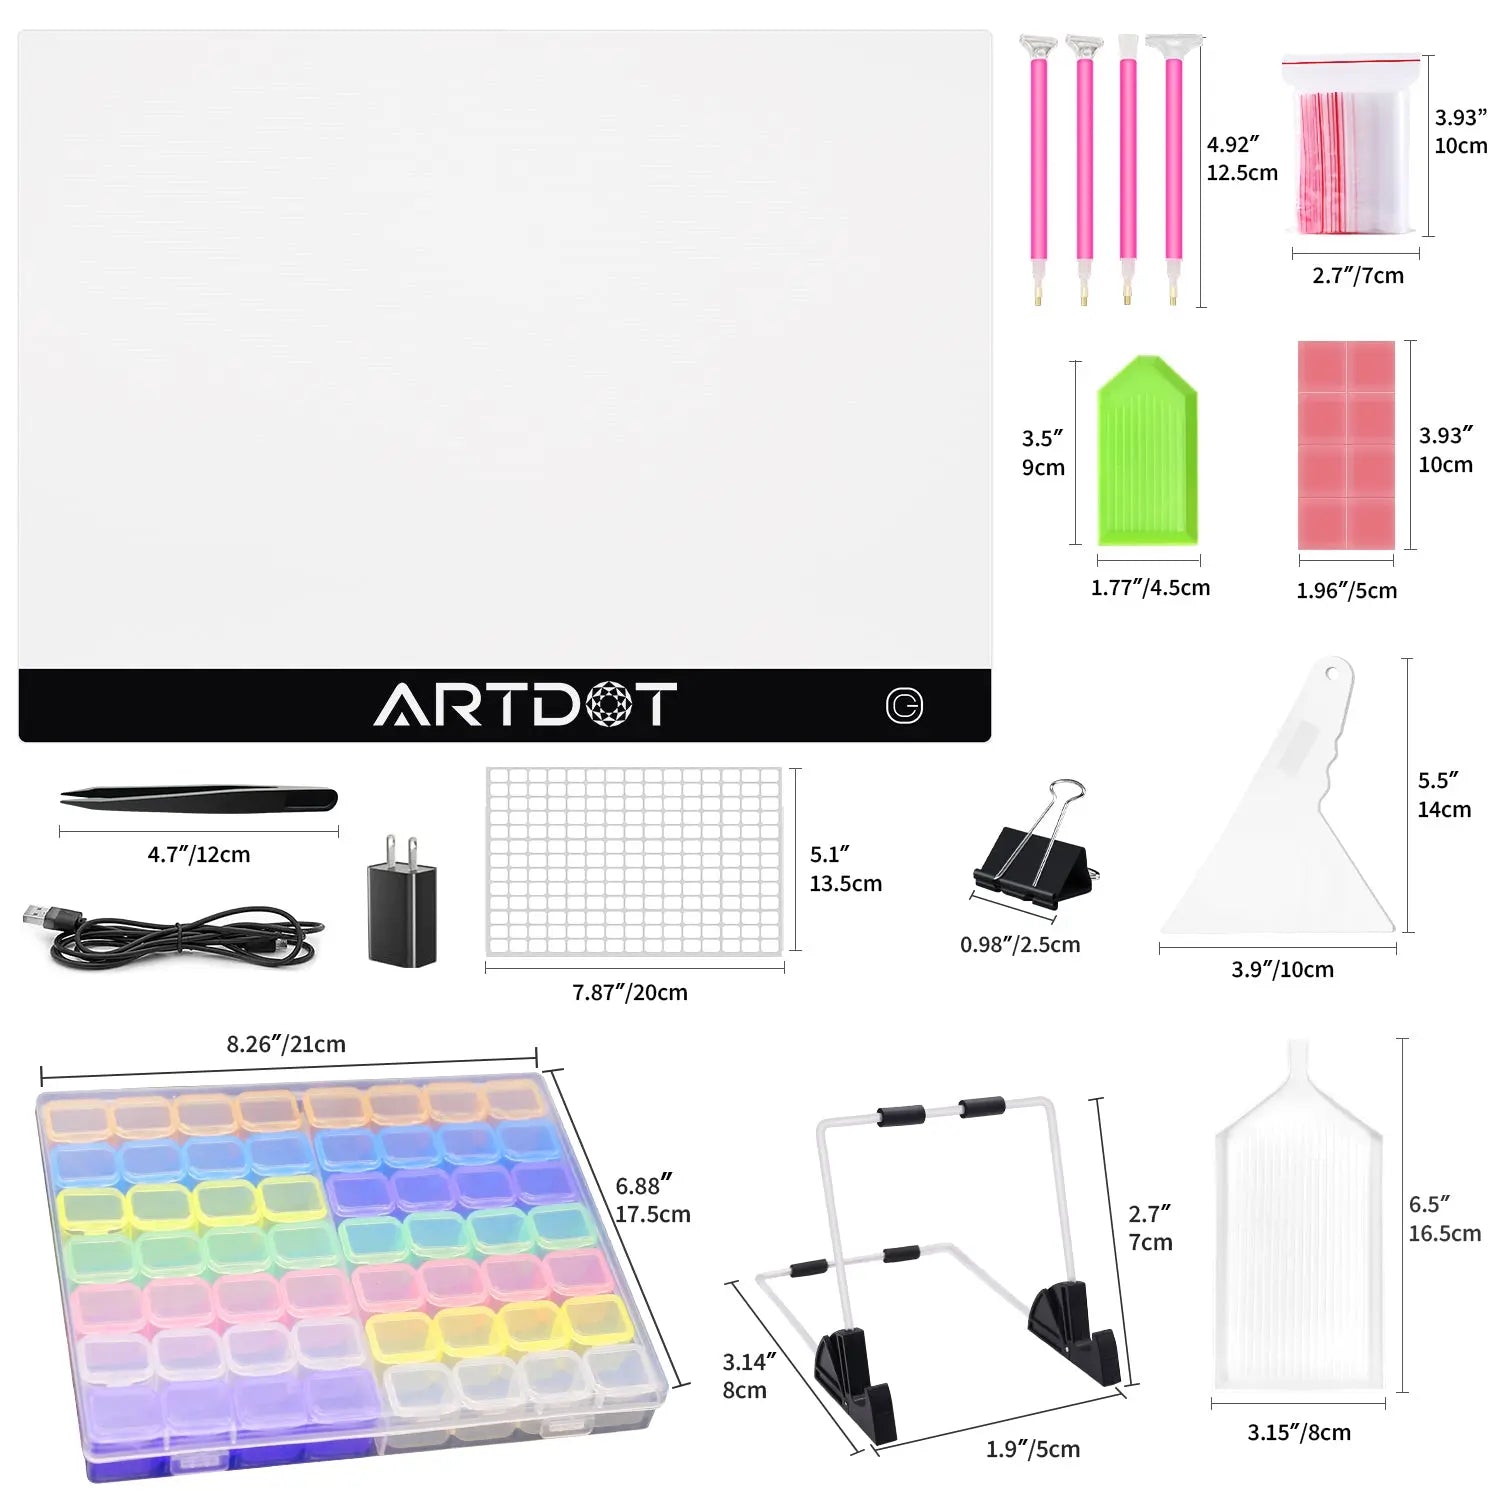 ARTDOT A4 LED Light Board for Diamond Painting Kits, USB Powered Light Pad, Adjustable Brightness with Detachable Stand and Clips, Size: 13.2 x 9.2